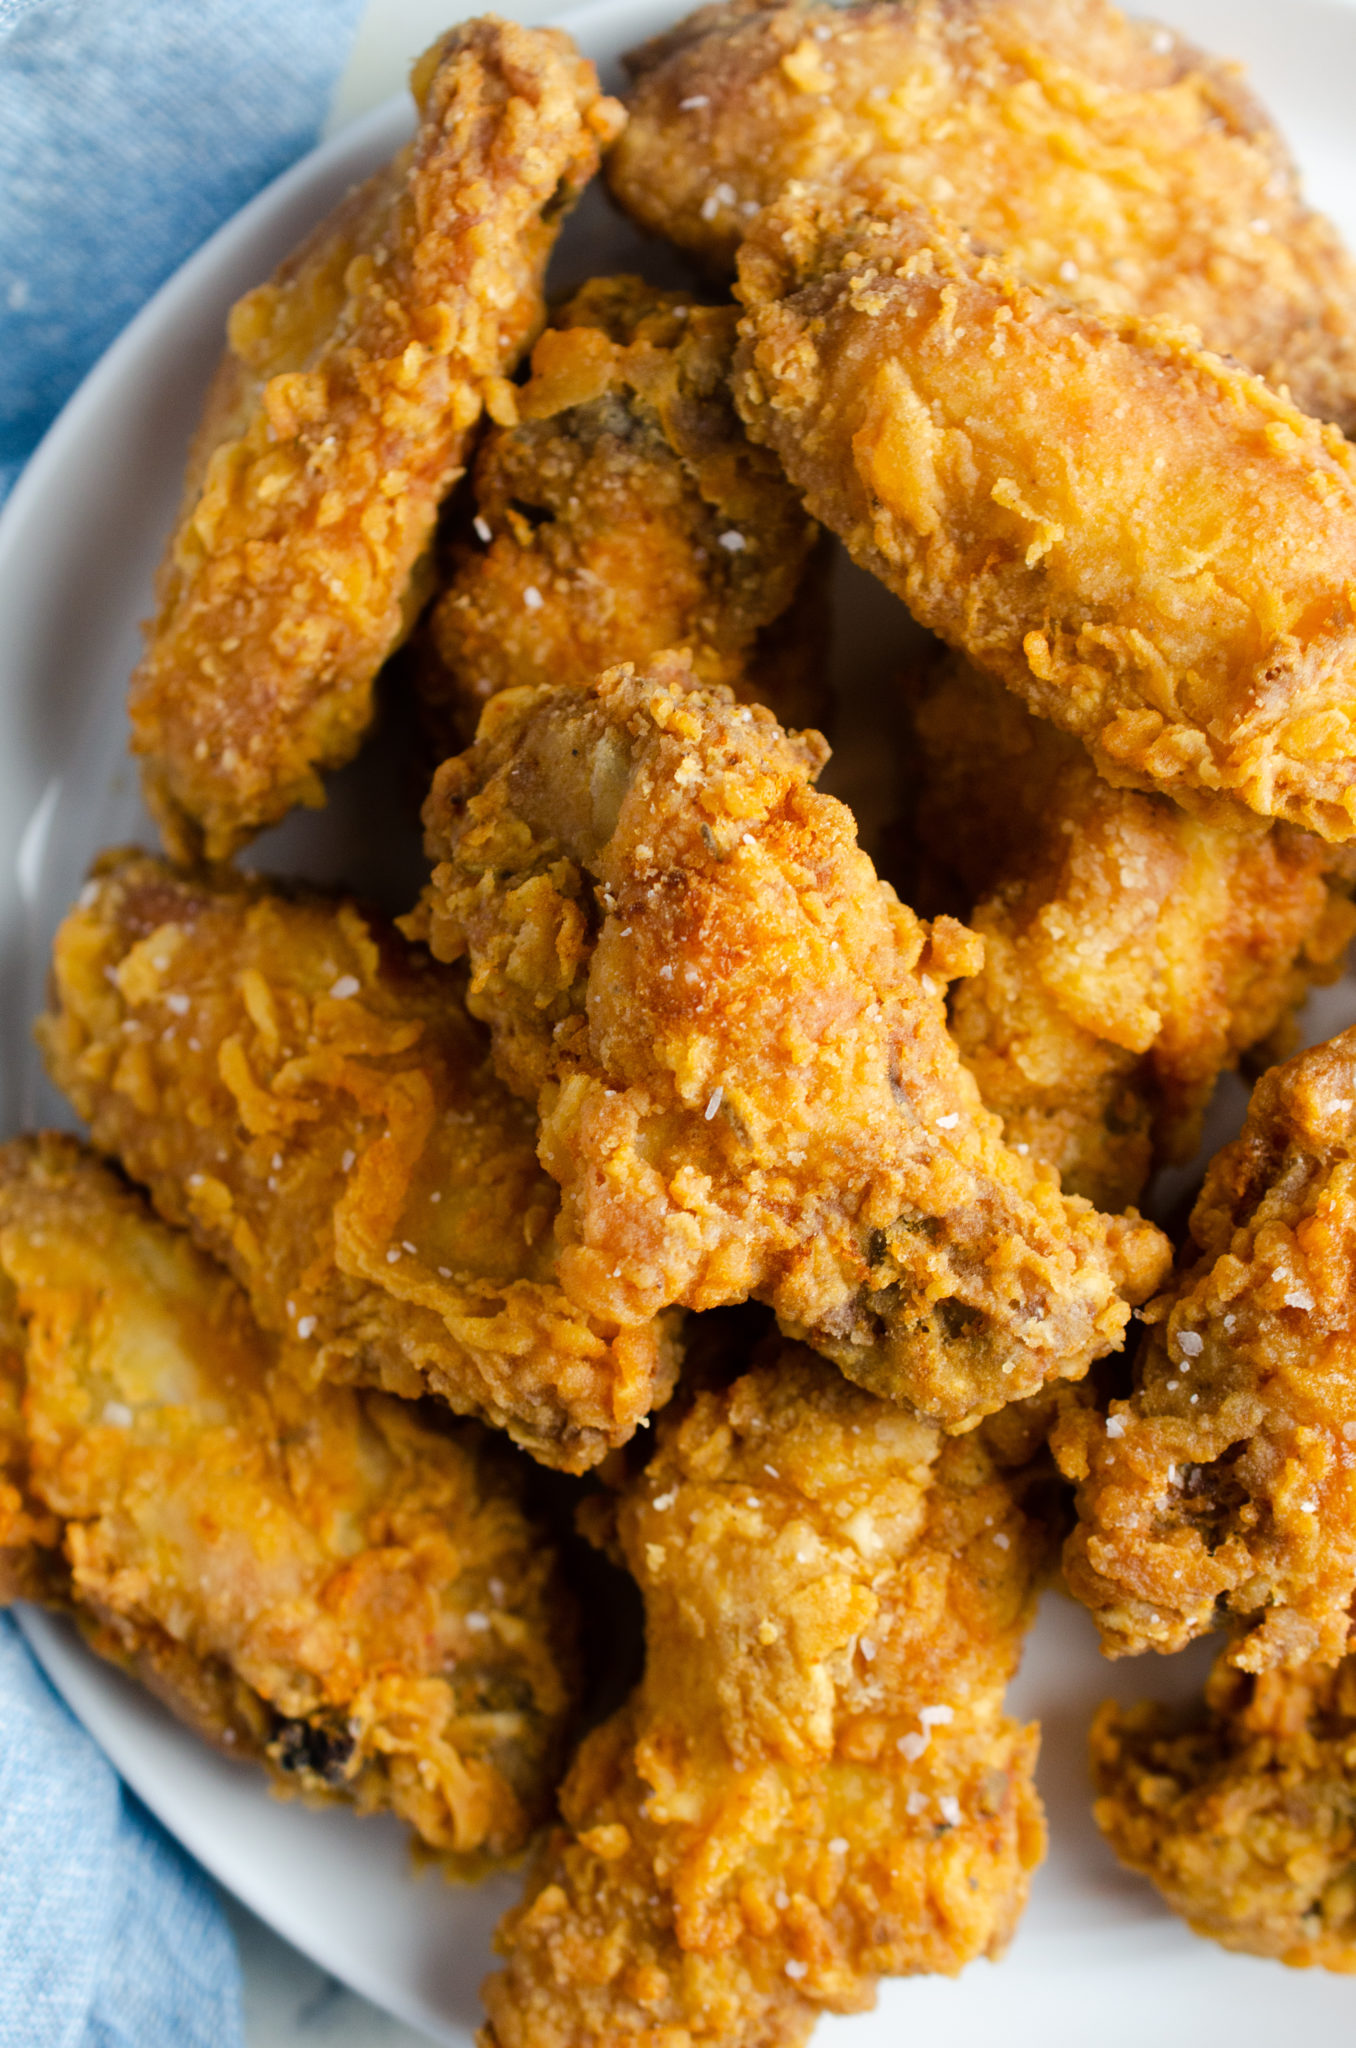 Deep Fried Chicken Wings Recipe | Life's Ambrosia